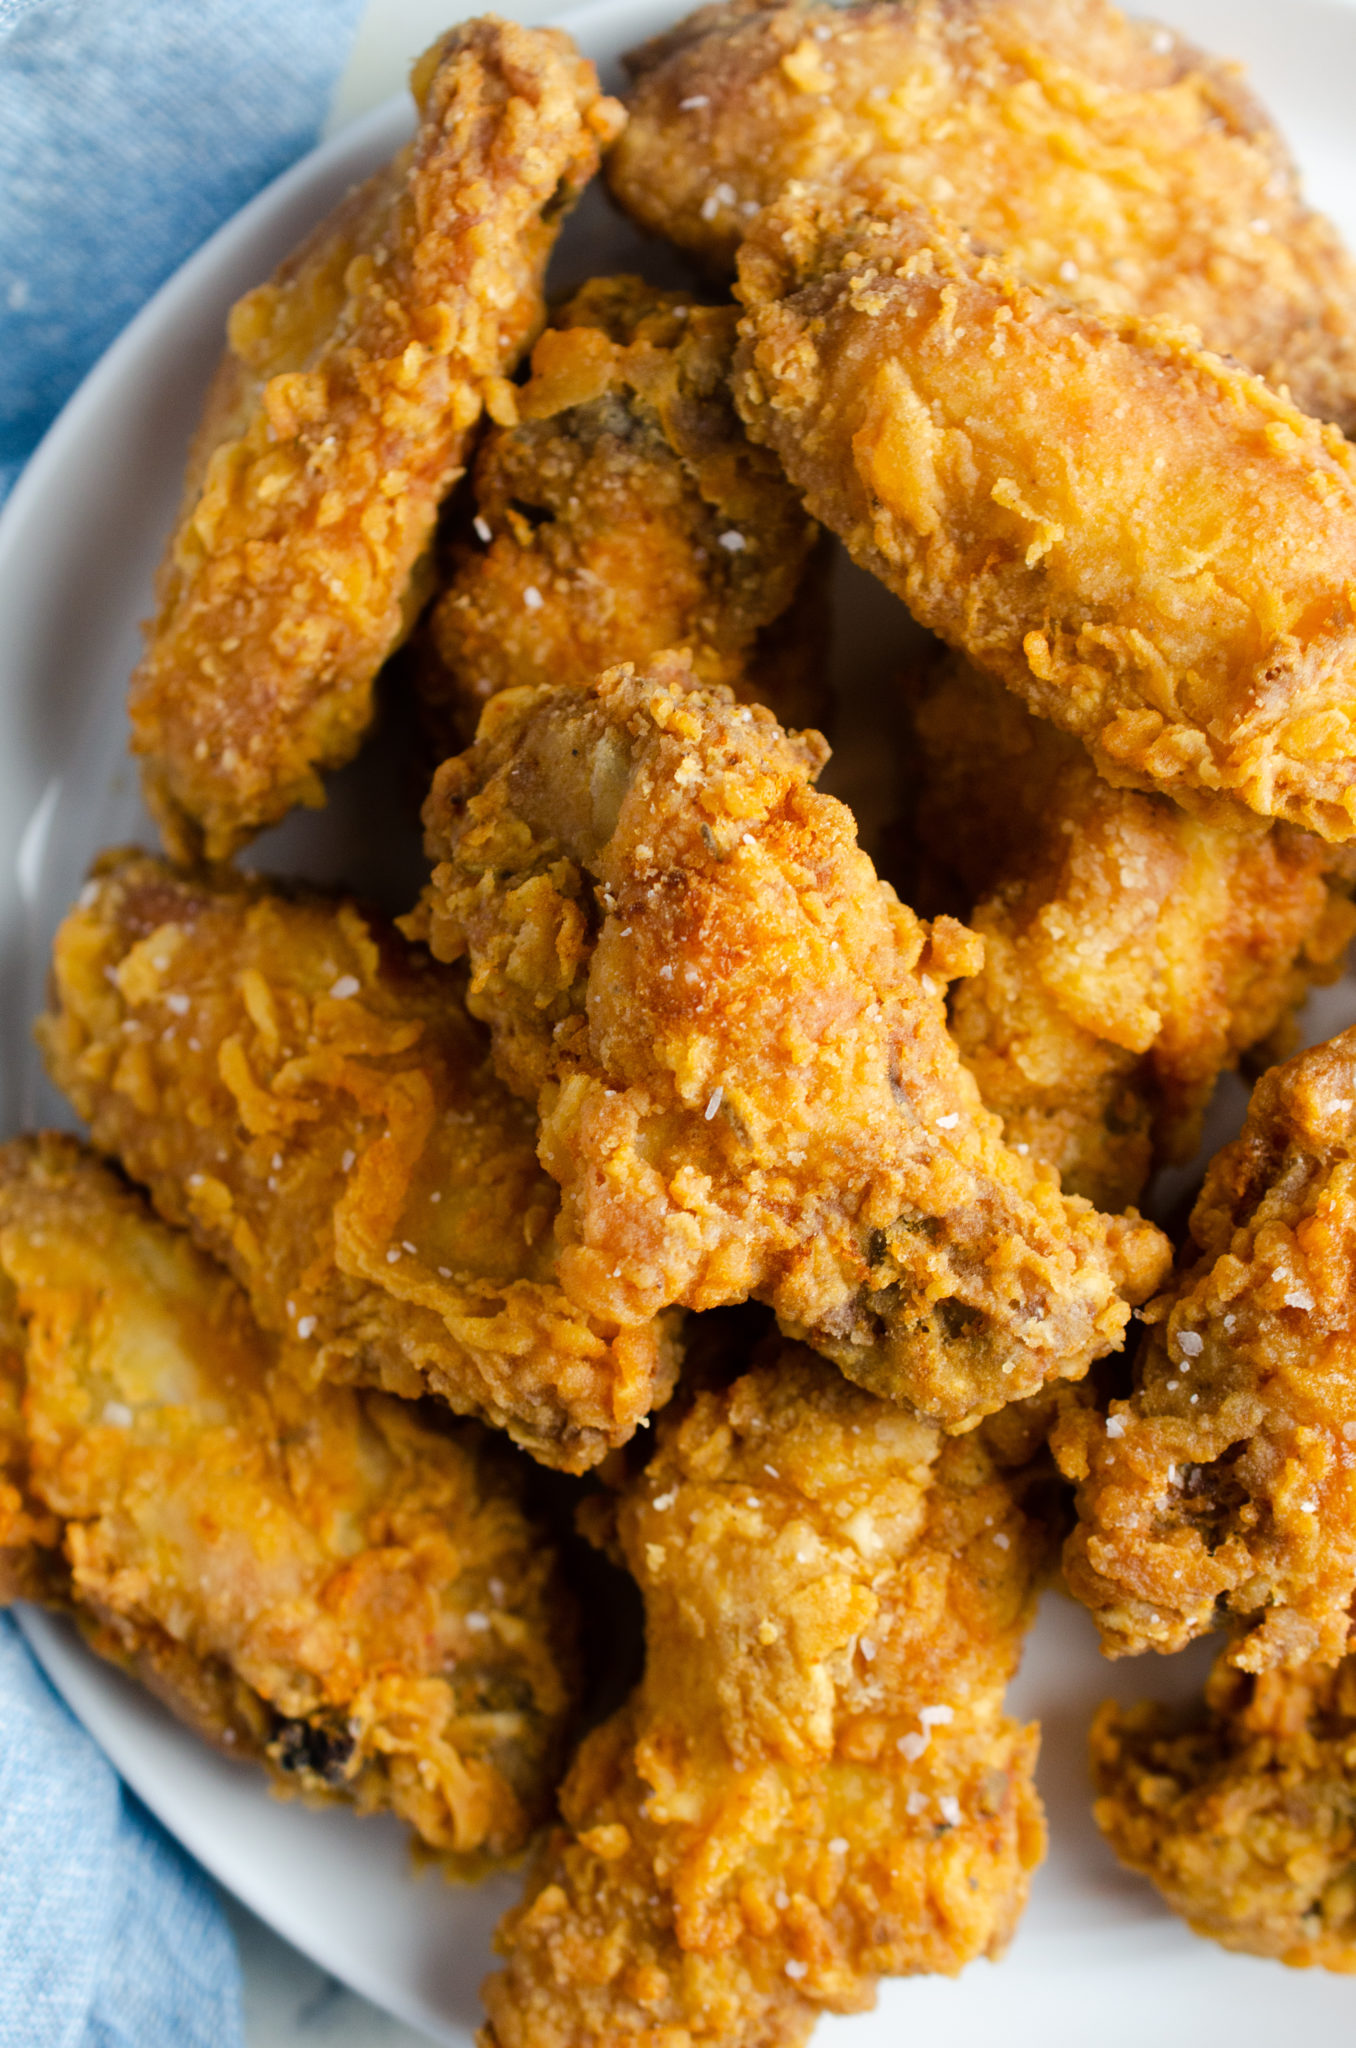 Deep Fried Chicken Wings Recipe | Life's Ambrosia